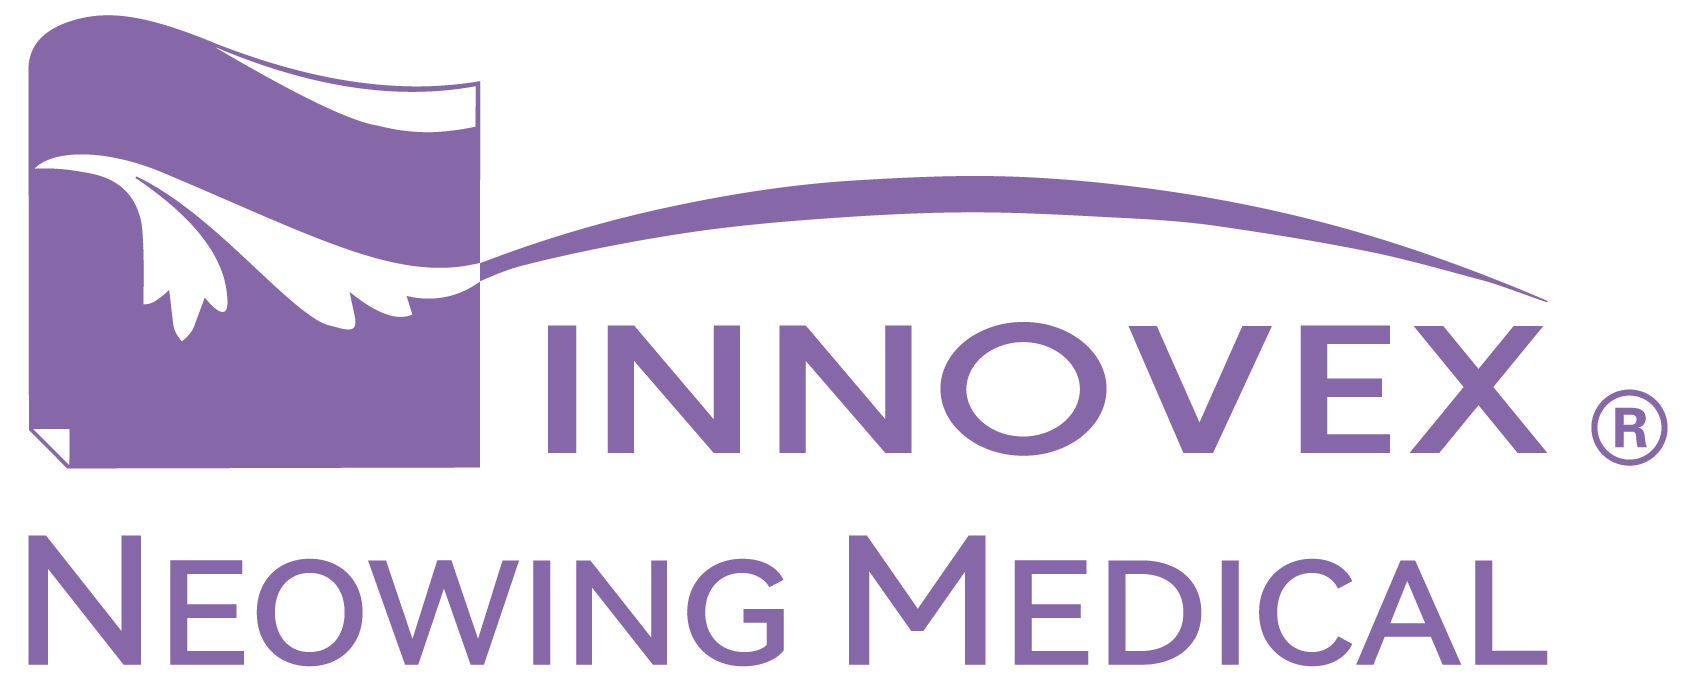 NEOWING MEDICAL